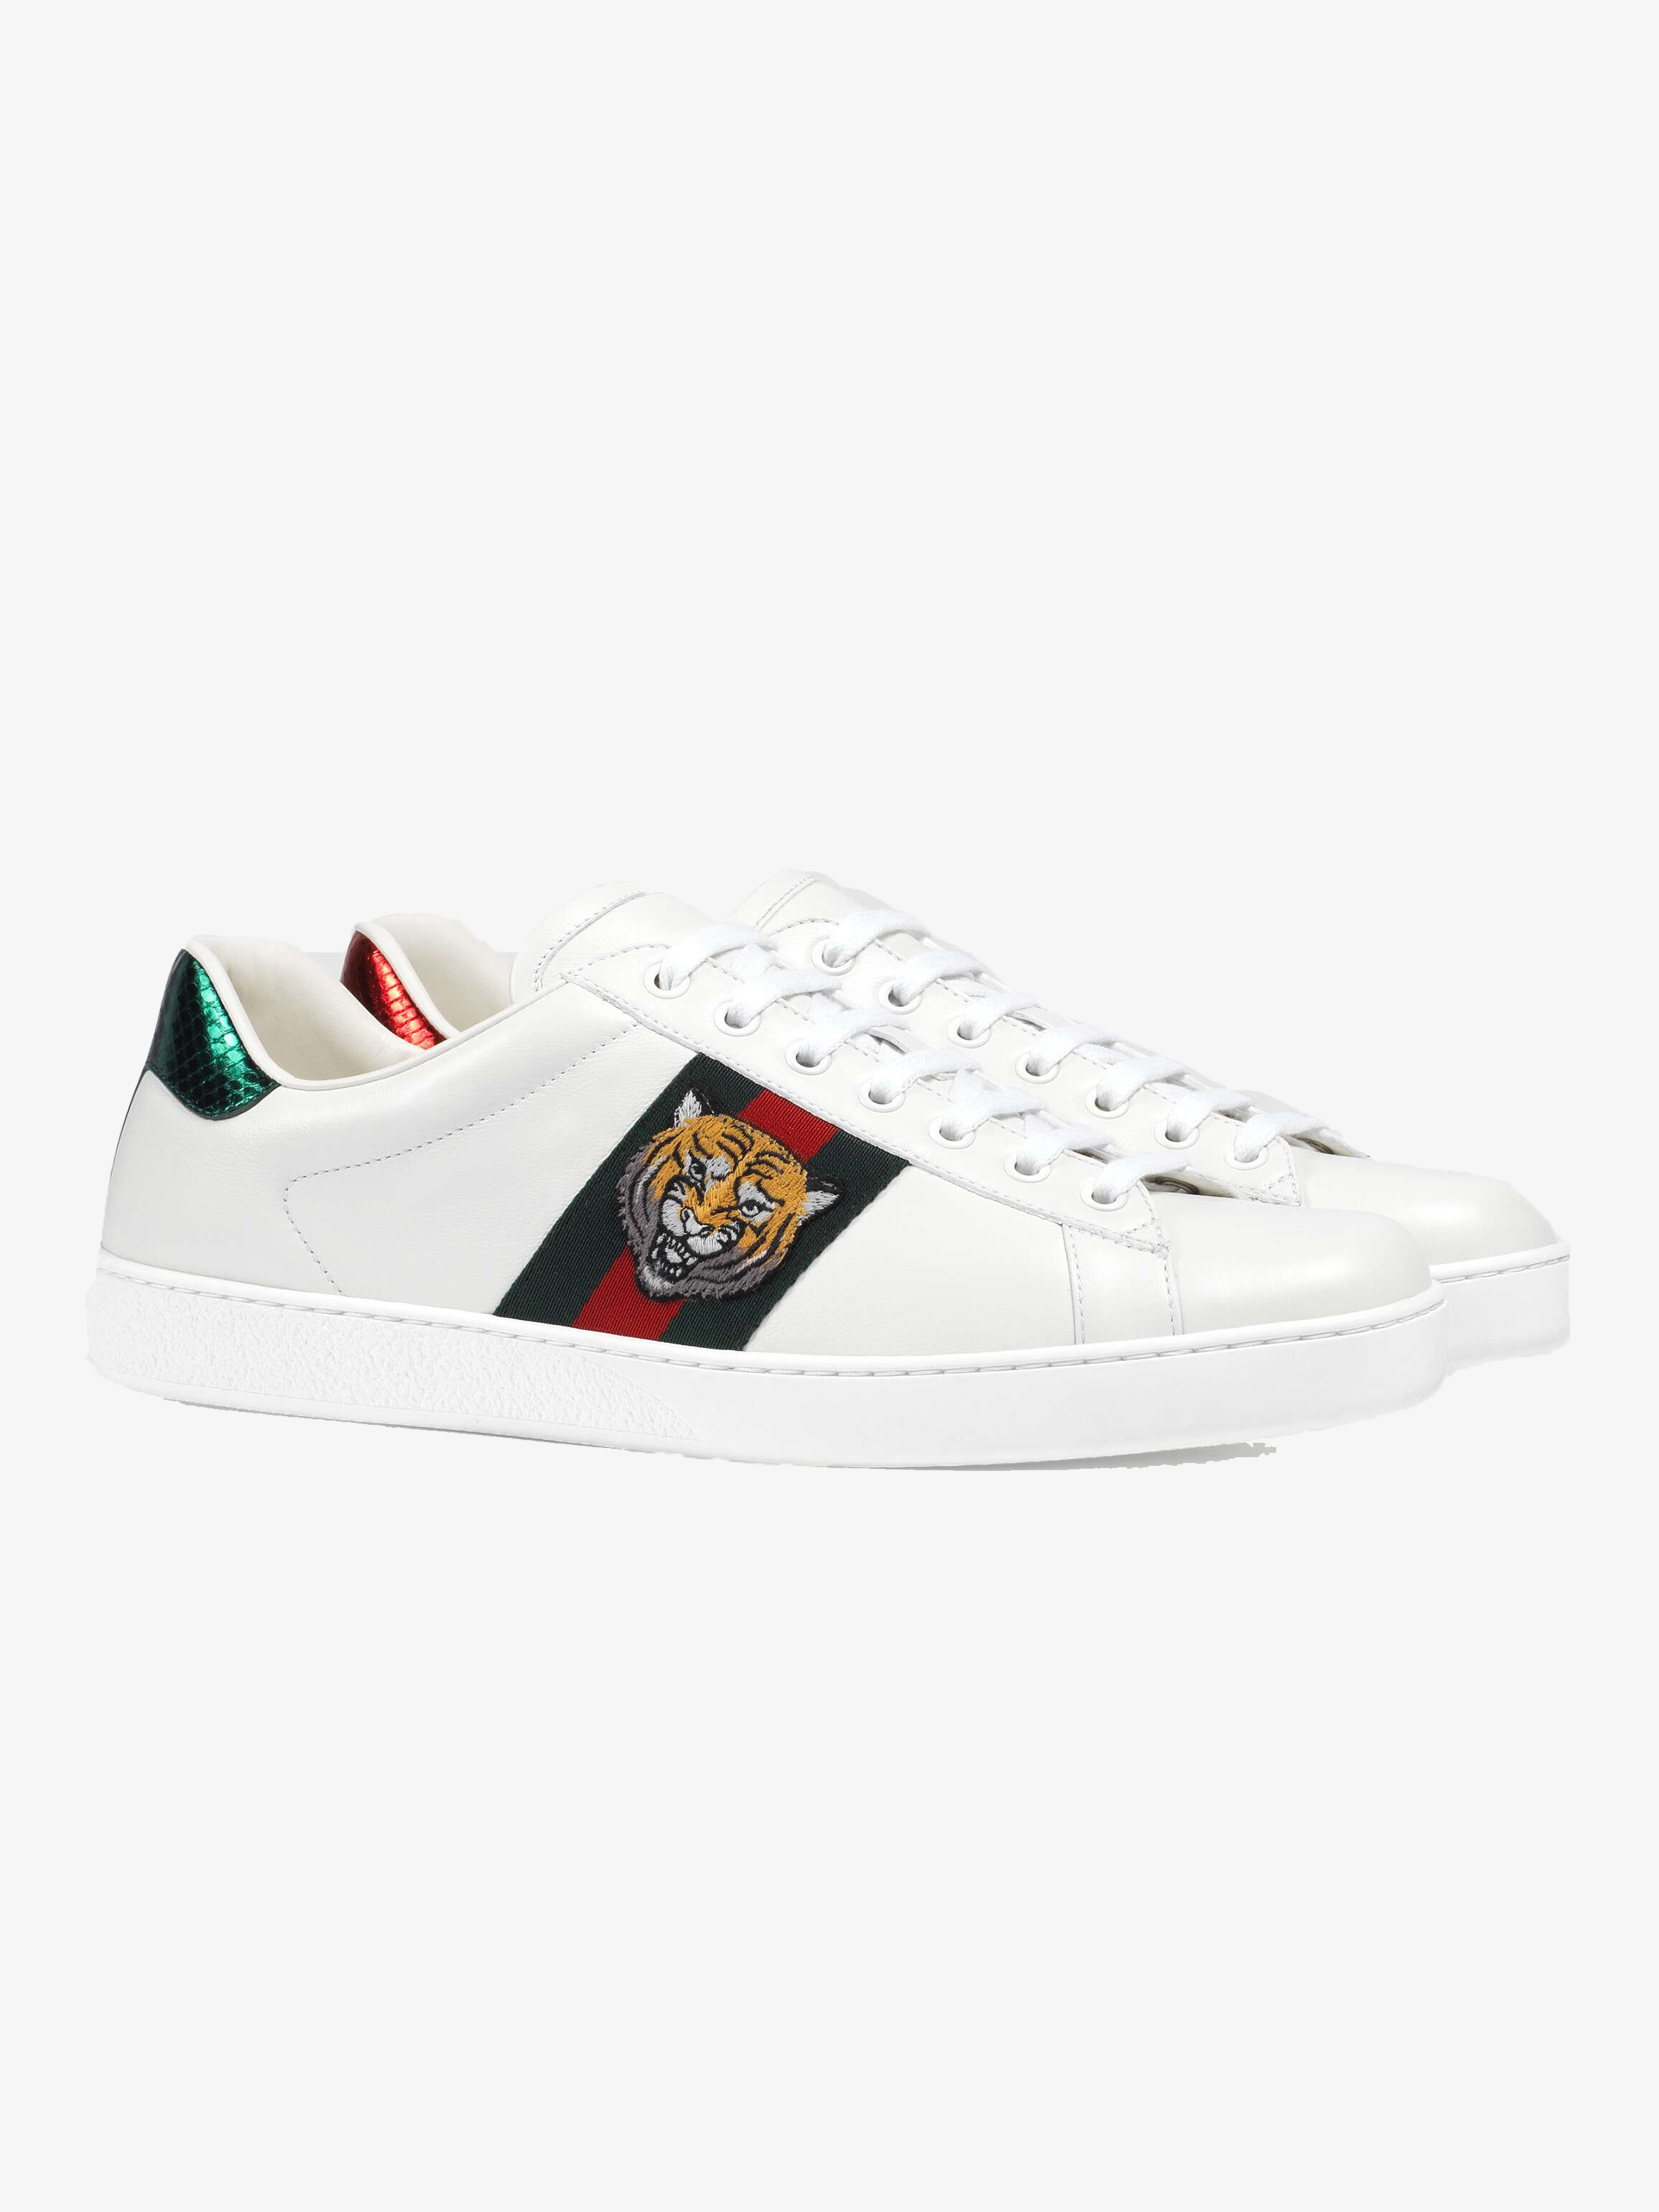 Gucci Ace Sneaker with Embroidered Tiger - Kicks Galeria